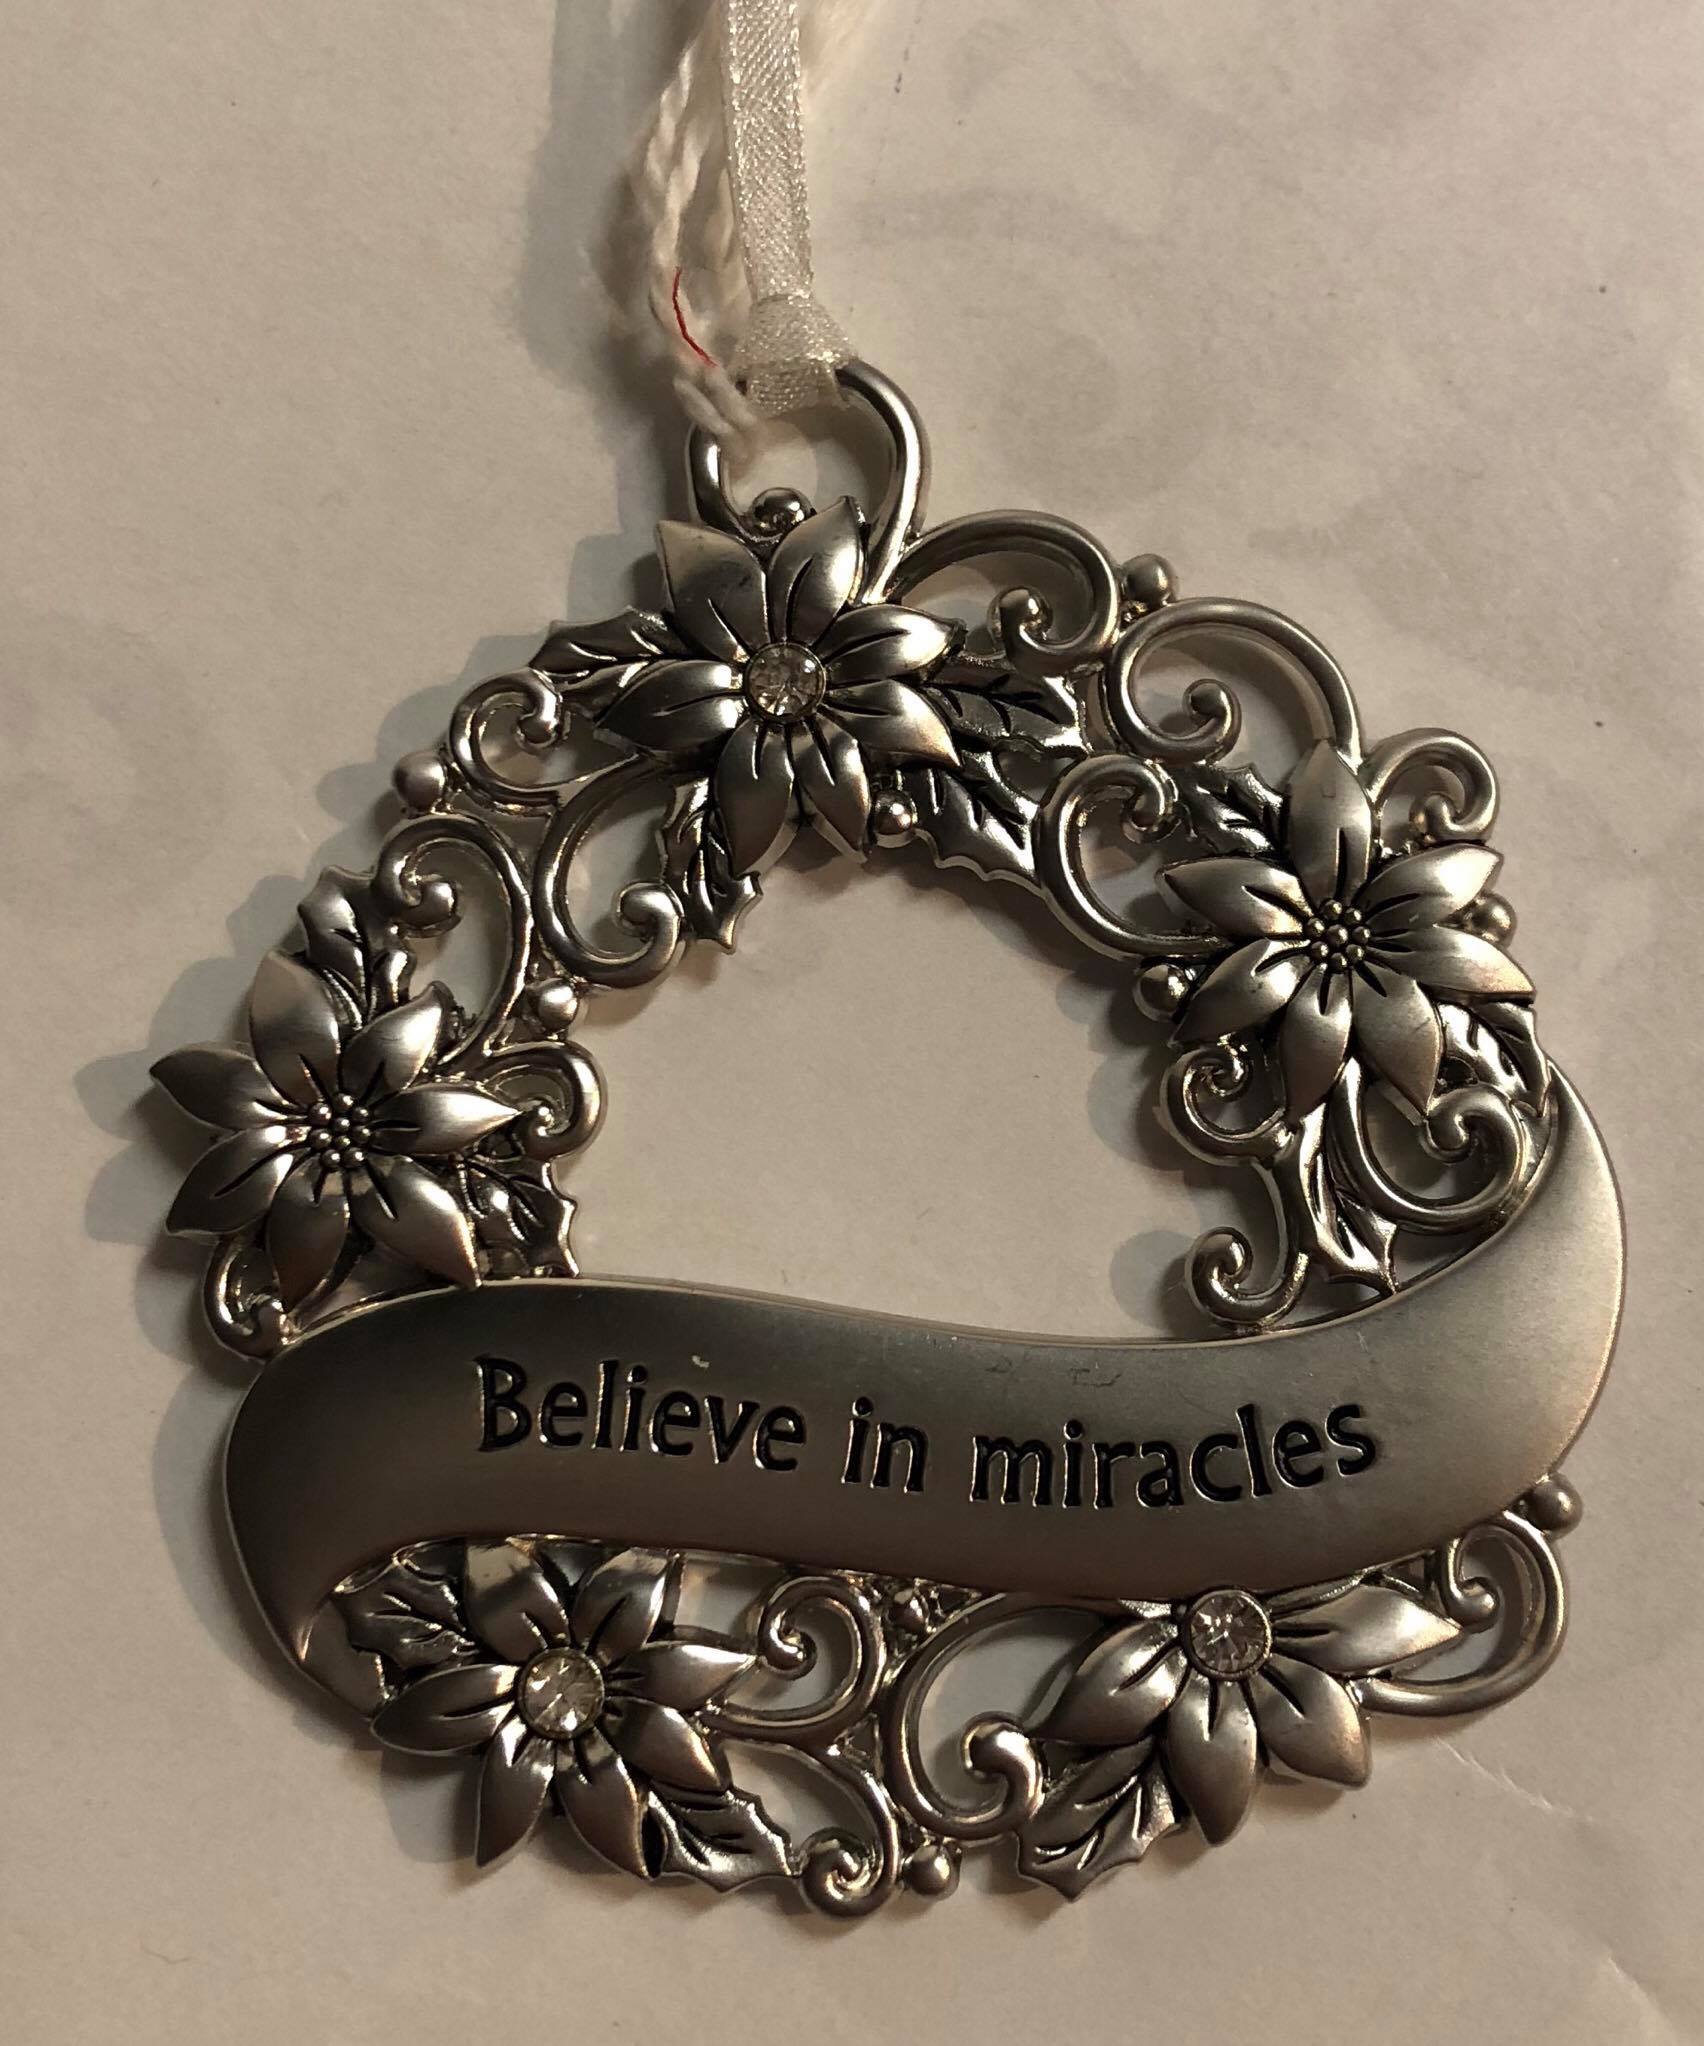 Wreath Tree Ornament "Believe in Miracles"